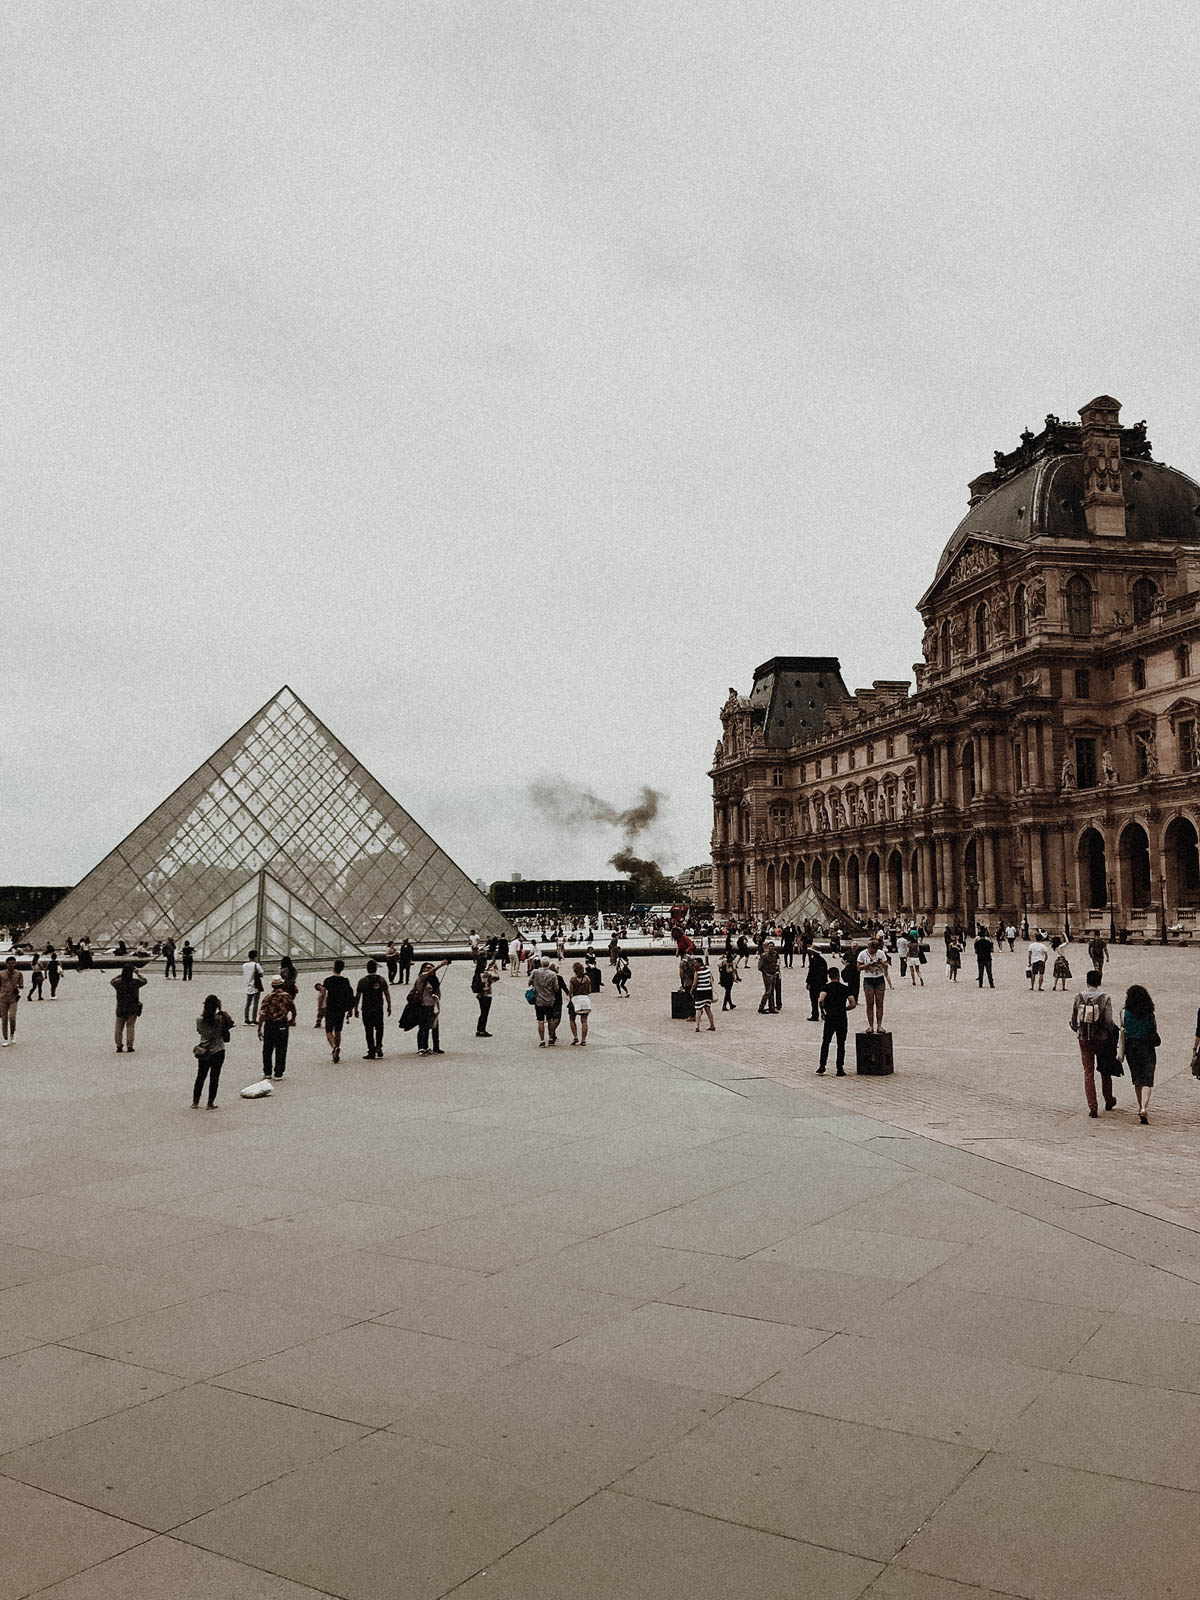 Paris France Travel Guide - Louvre Pyramid, European Architecture and Buildings / RG Daily Blog